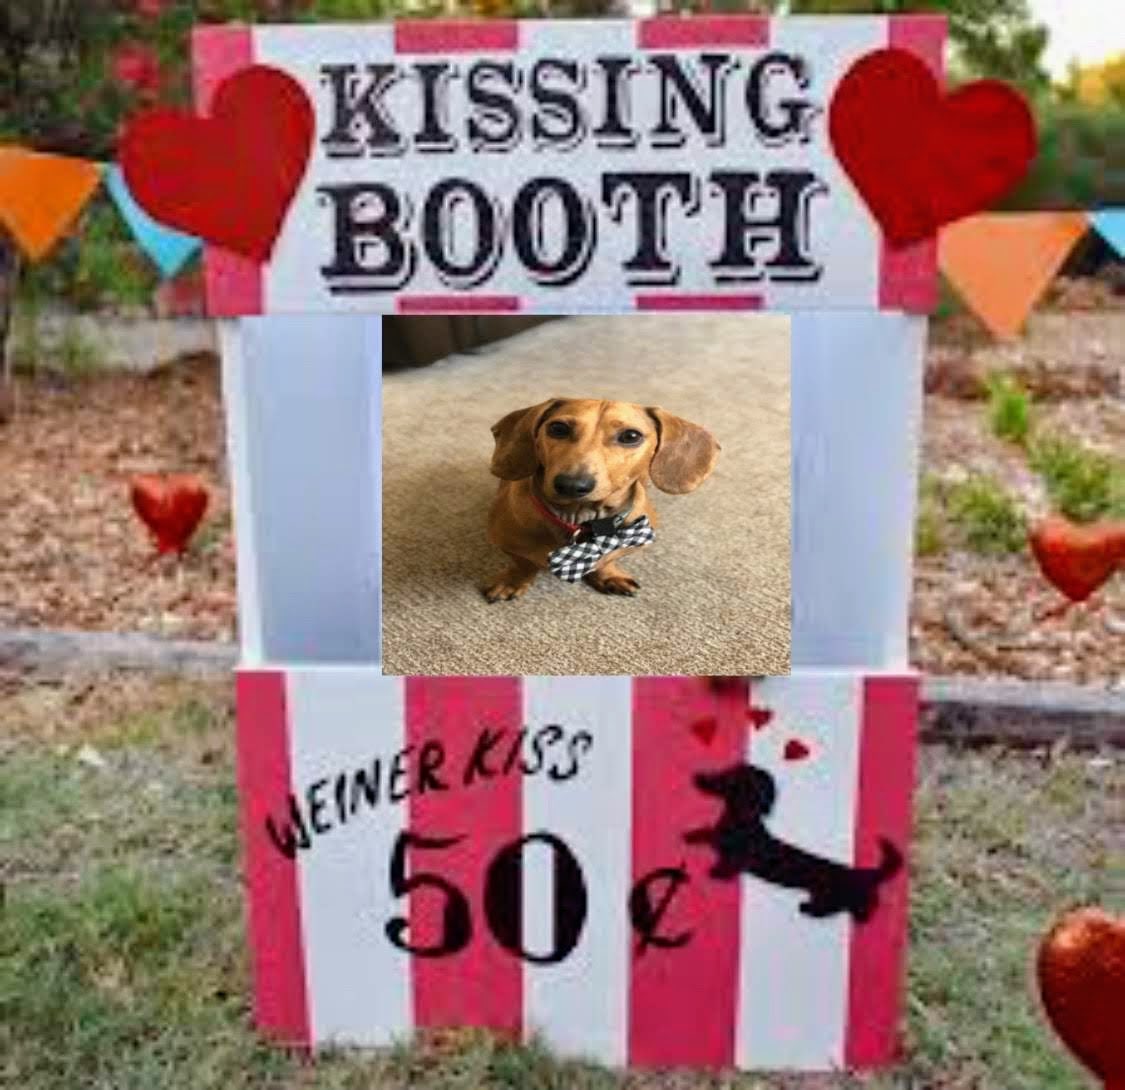 Happy Valentine’s Day everyone! ♥️
#dogsoftwitter #kissingbooth #Dachshunds